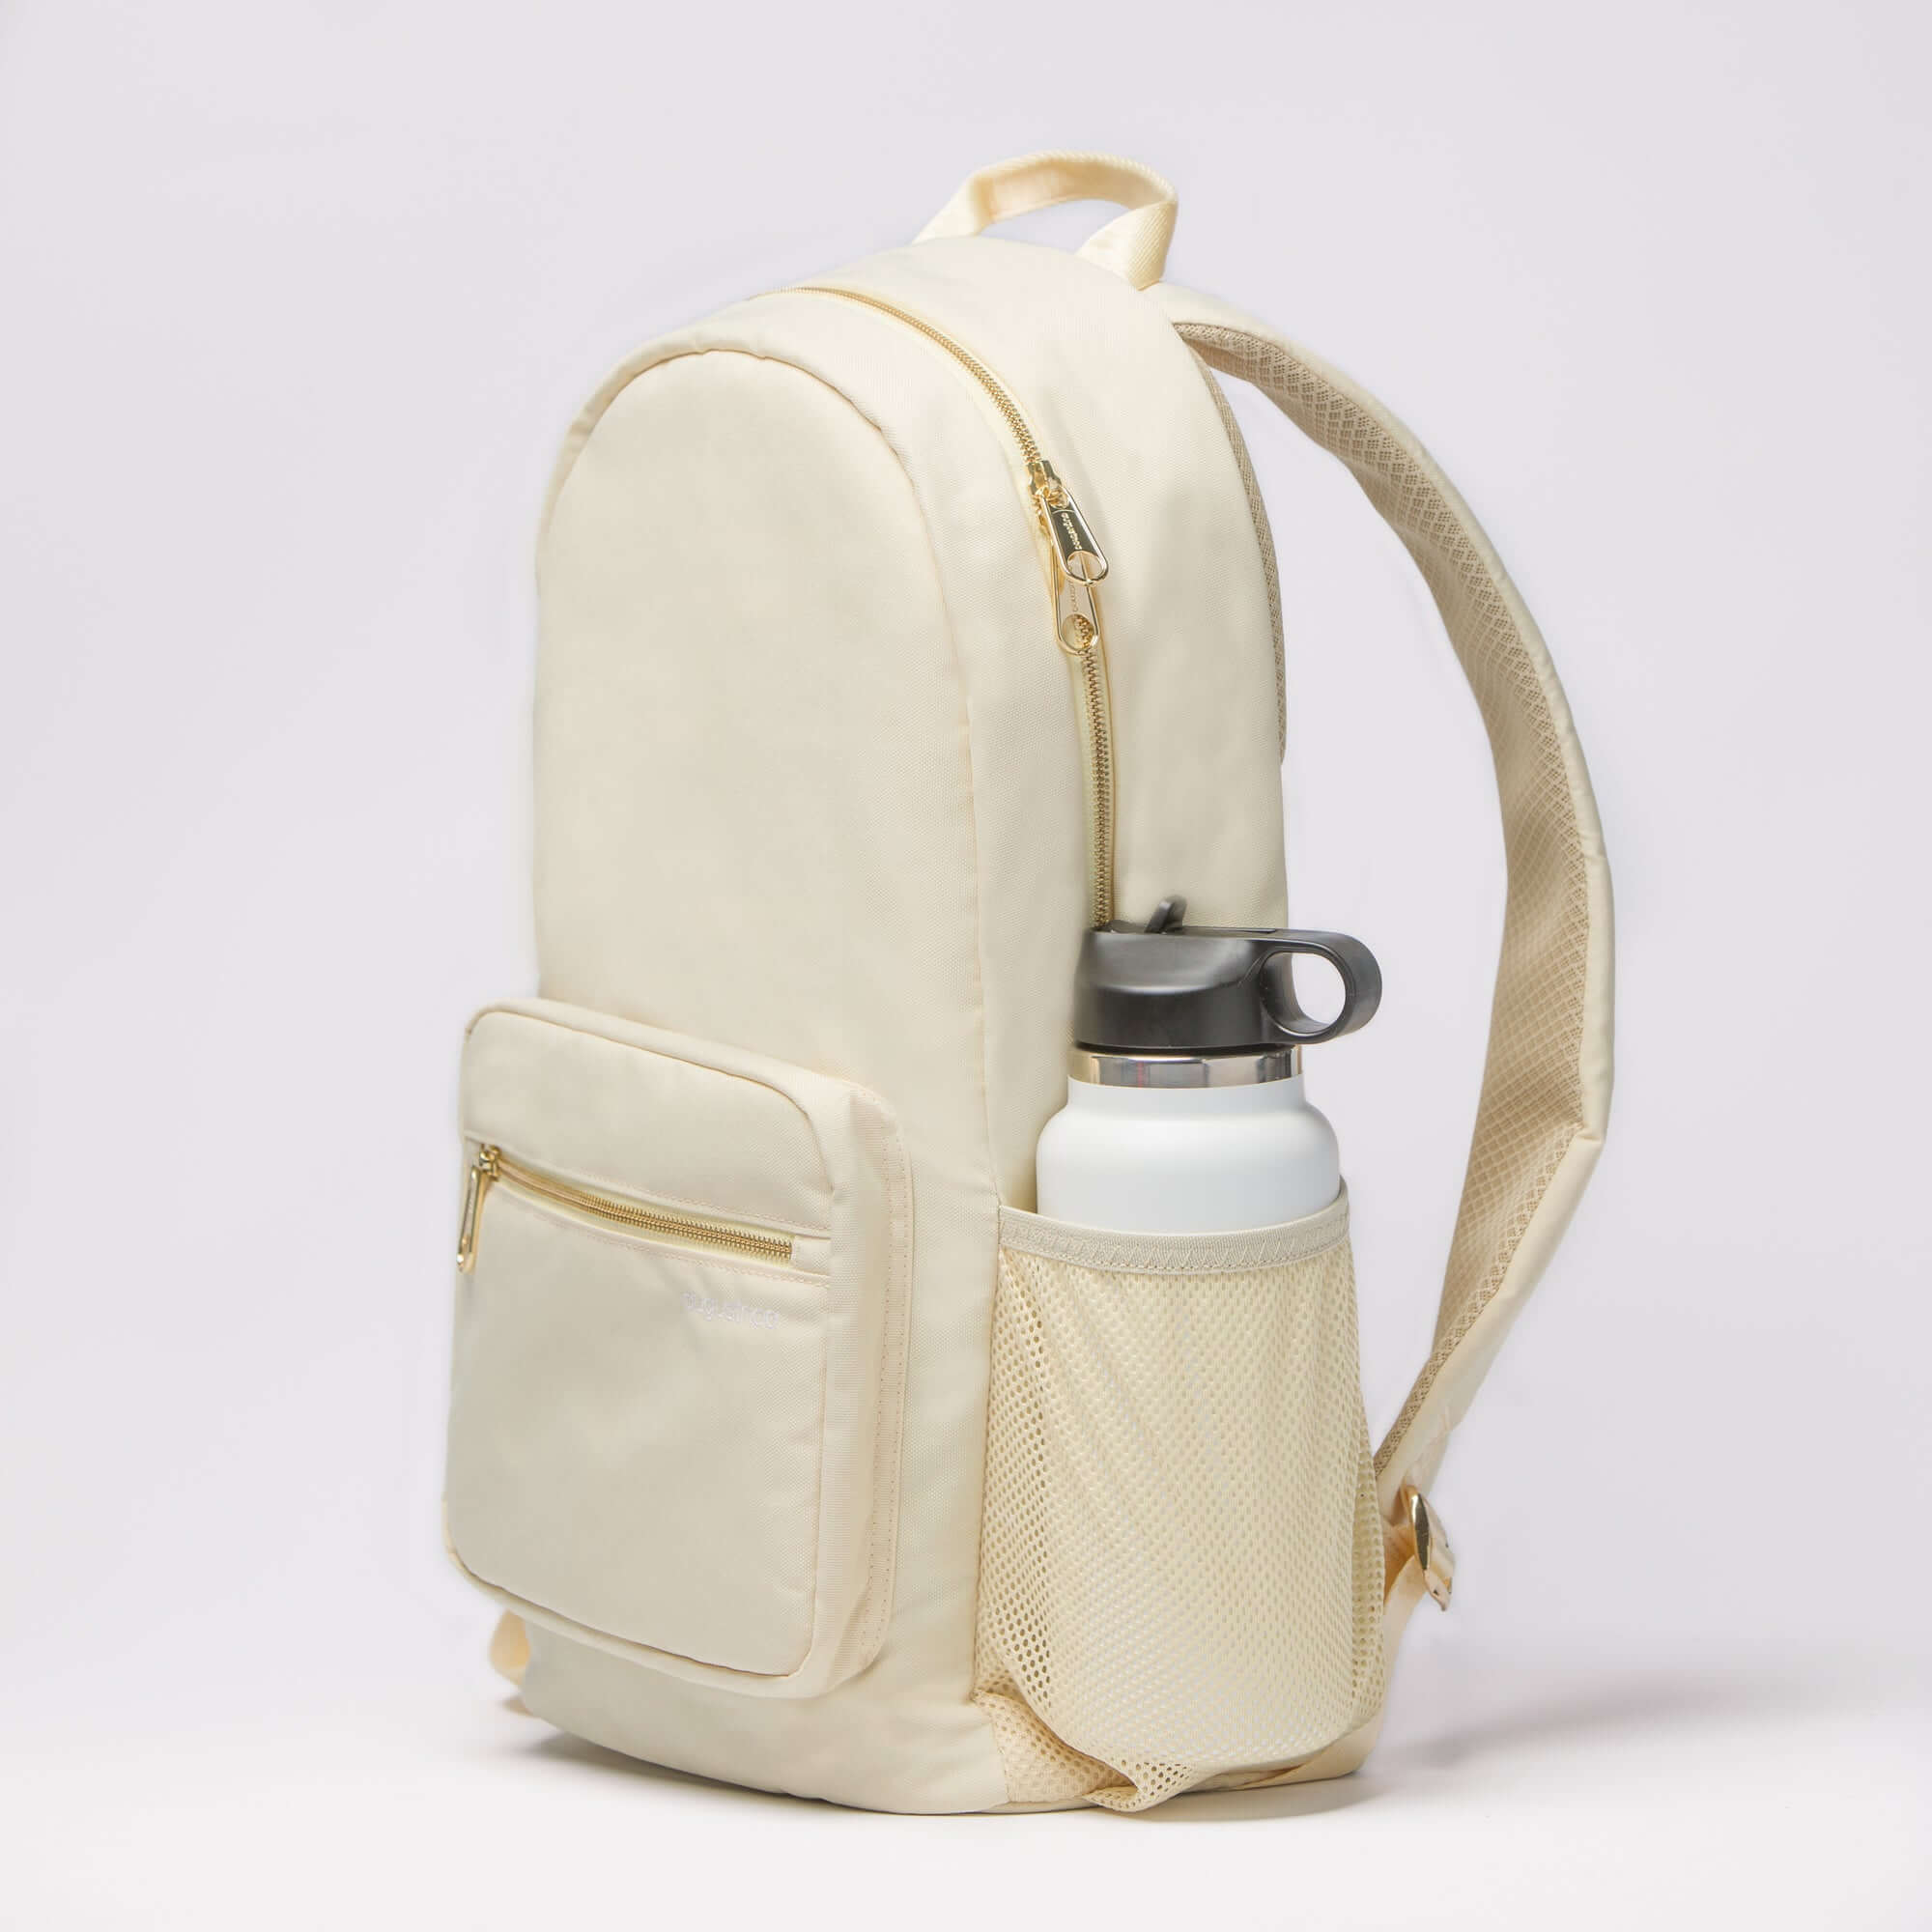 cream backpack made from recycled materials with gold hardware and lots of pockets including a laptop sleeve and trolley sleeve for your suitcase